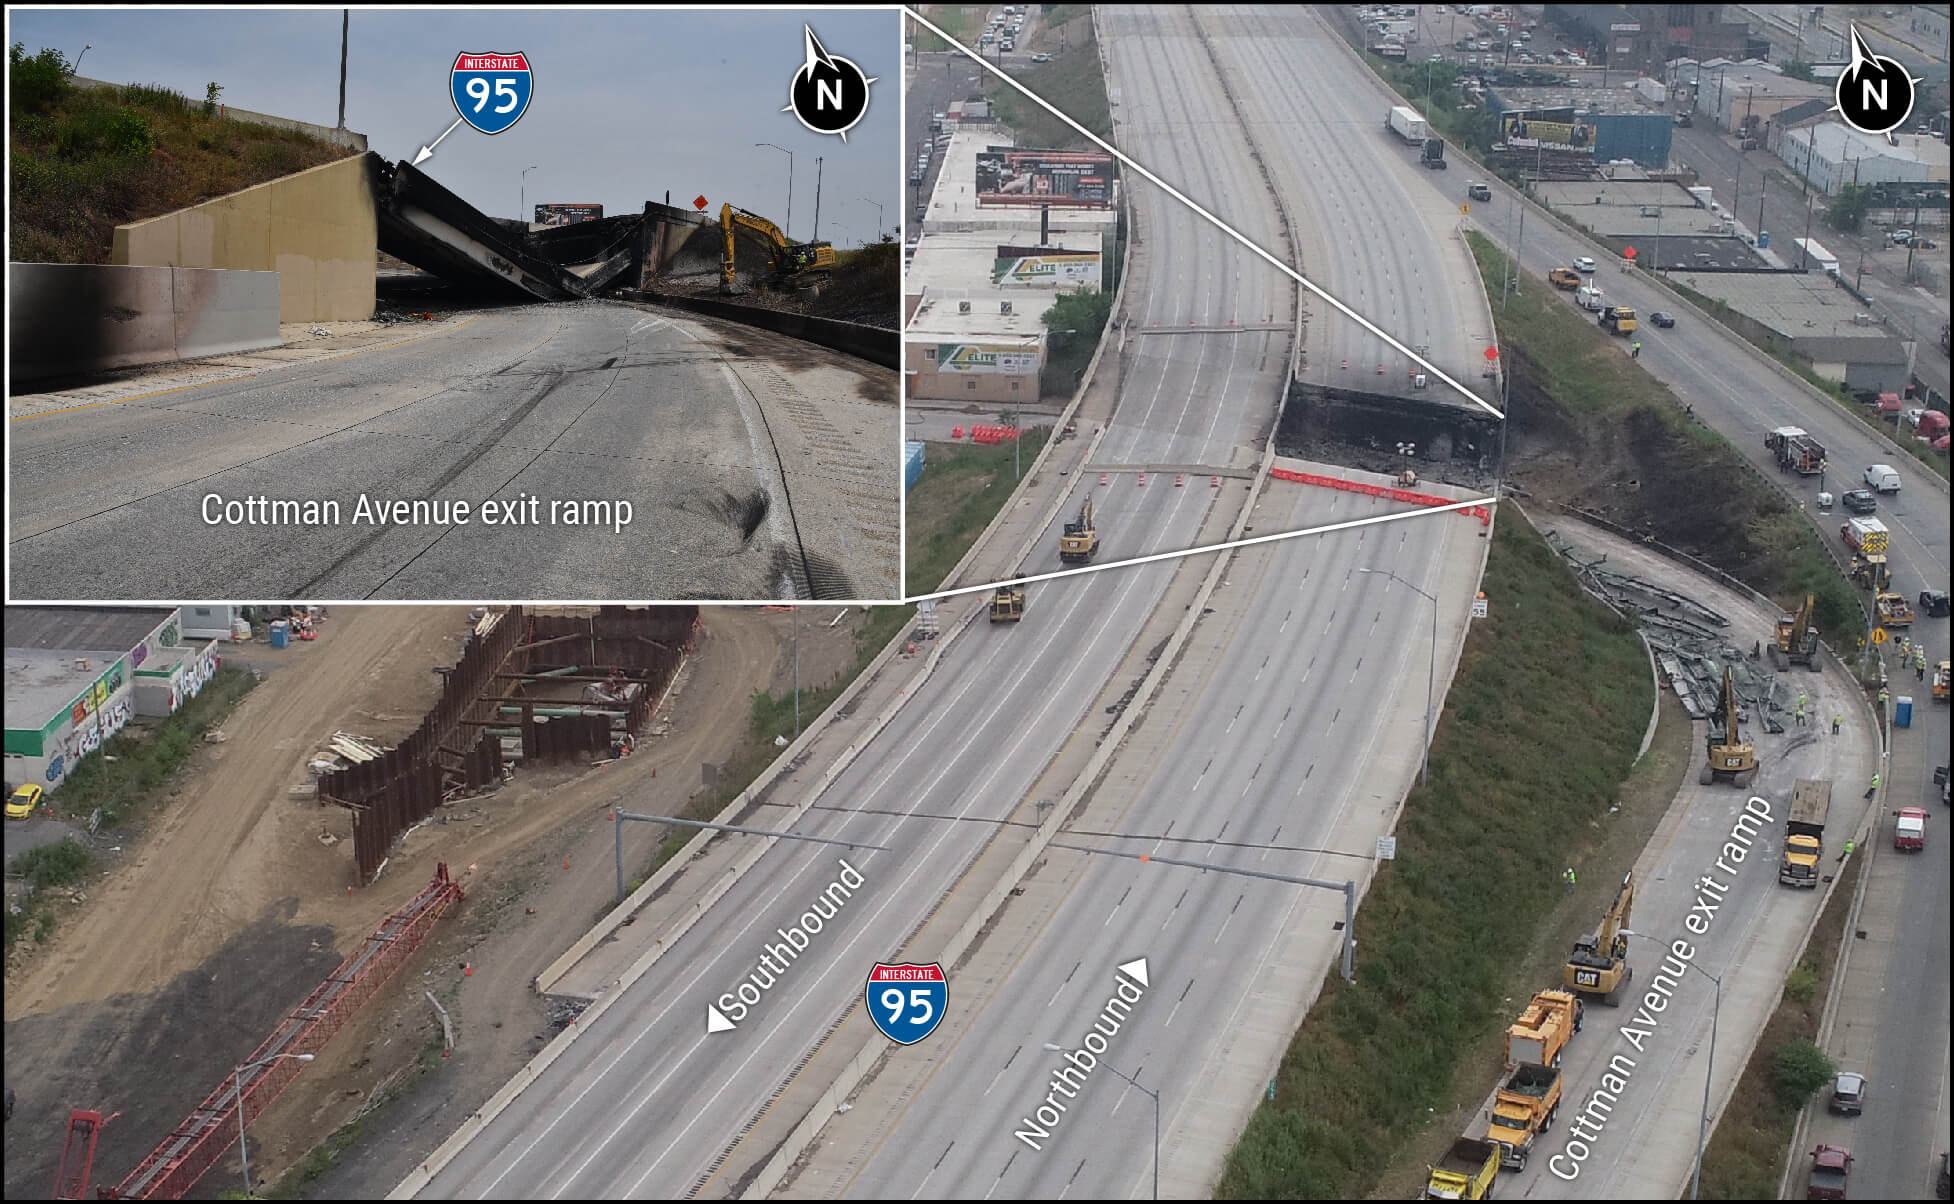 Aerial view of the collapsed I-95 bridge over Cottman Ave. in Philadelphia, Pennsylvania. Image inset at ground level shows the collapsed span.